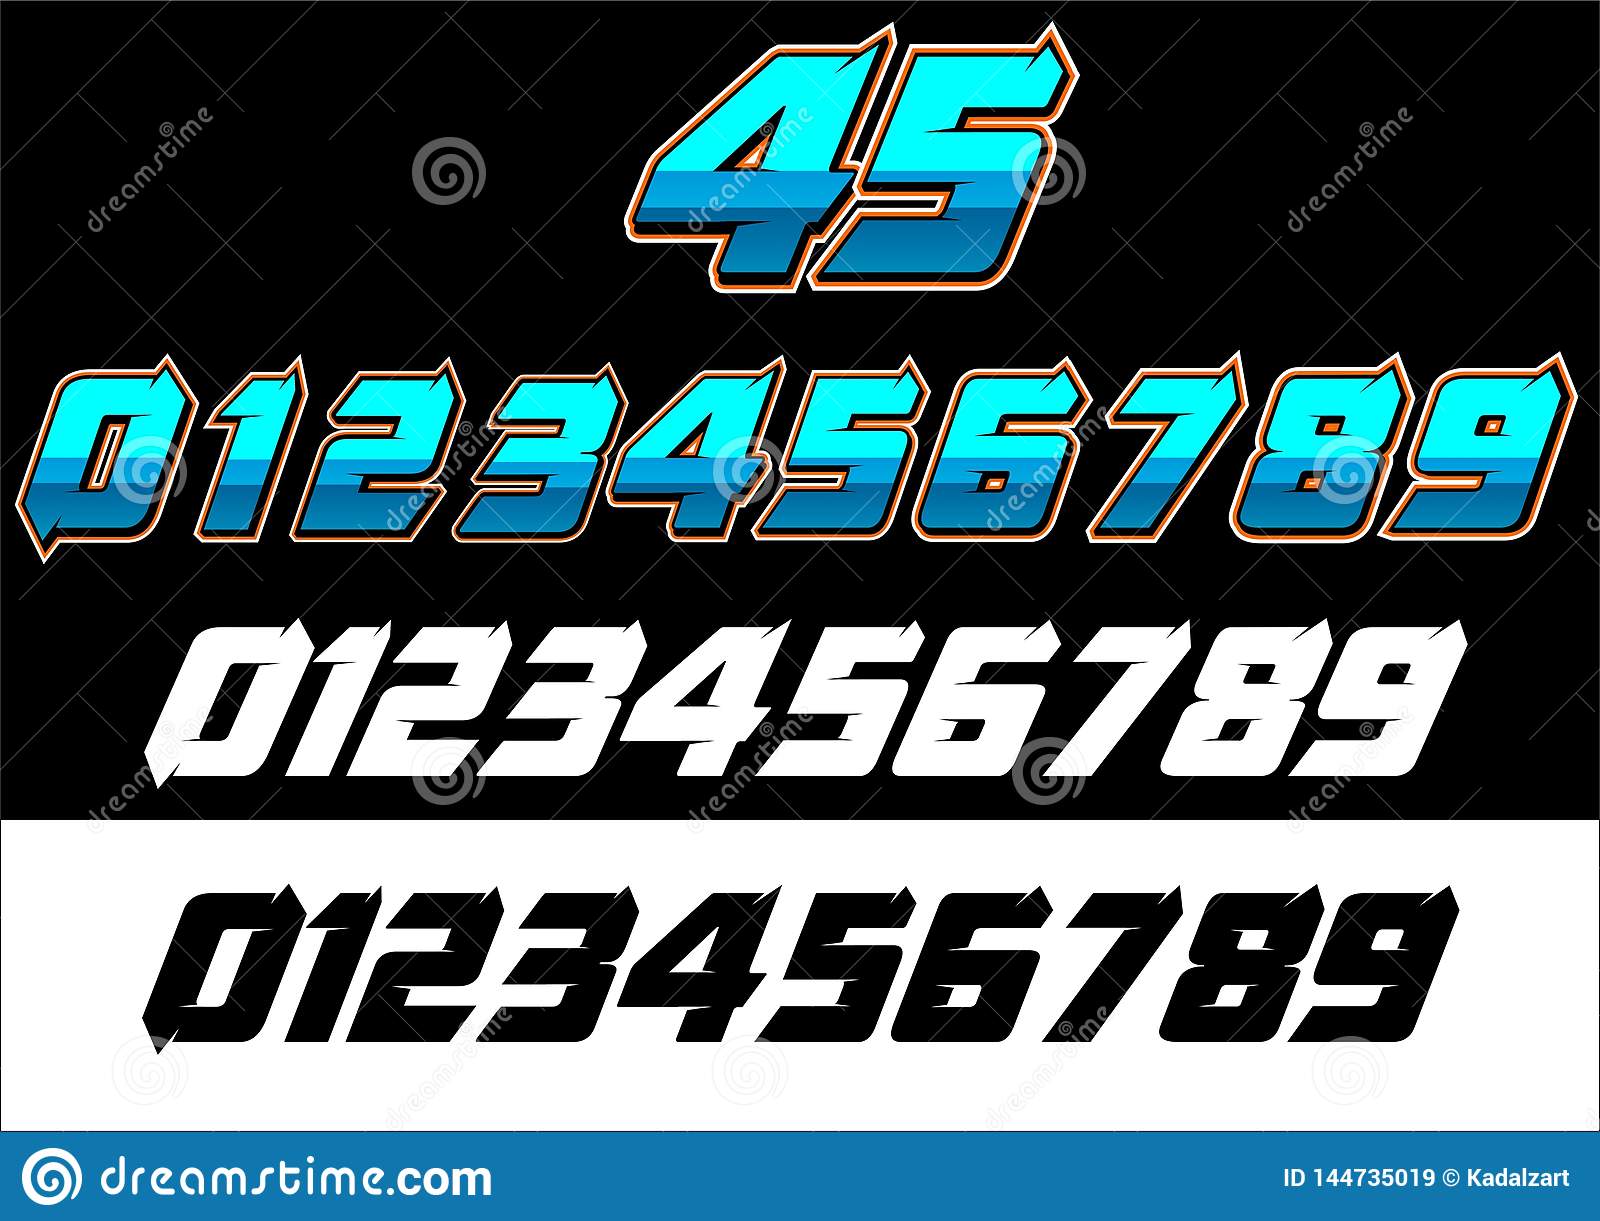 helli-everyone-if-your-serch-number-racing-typography-fun-your-racing-number-hell-144735019.jpg